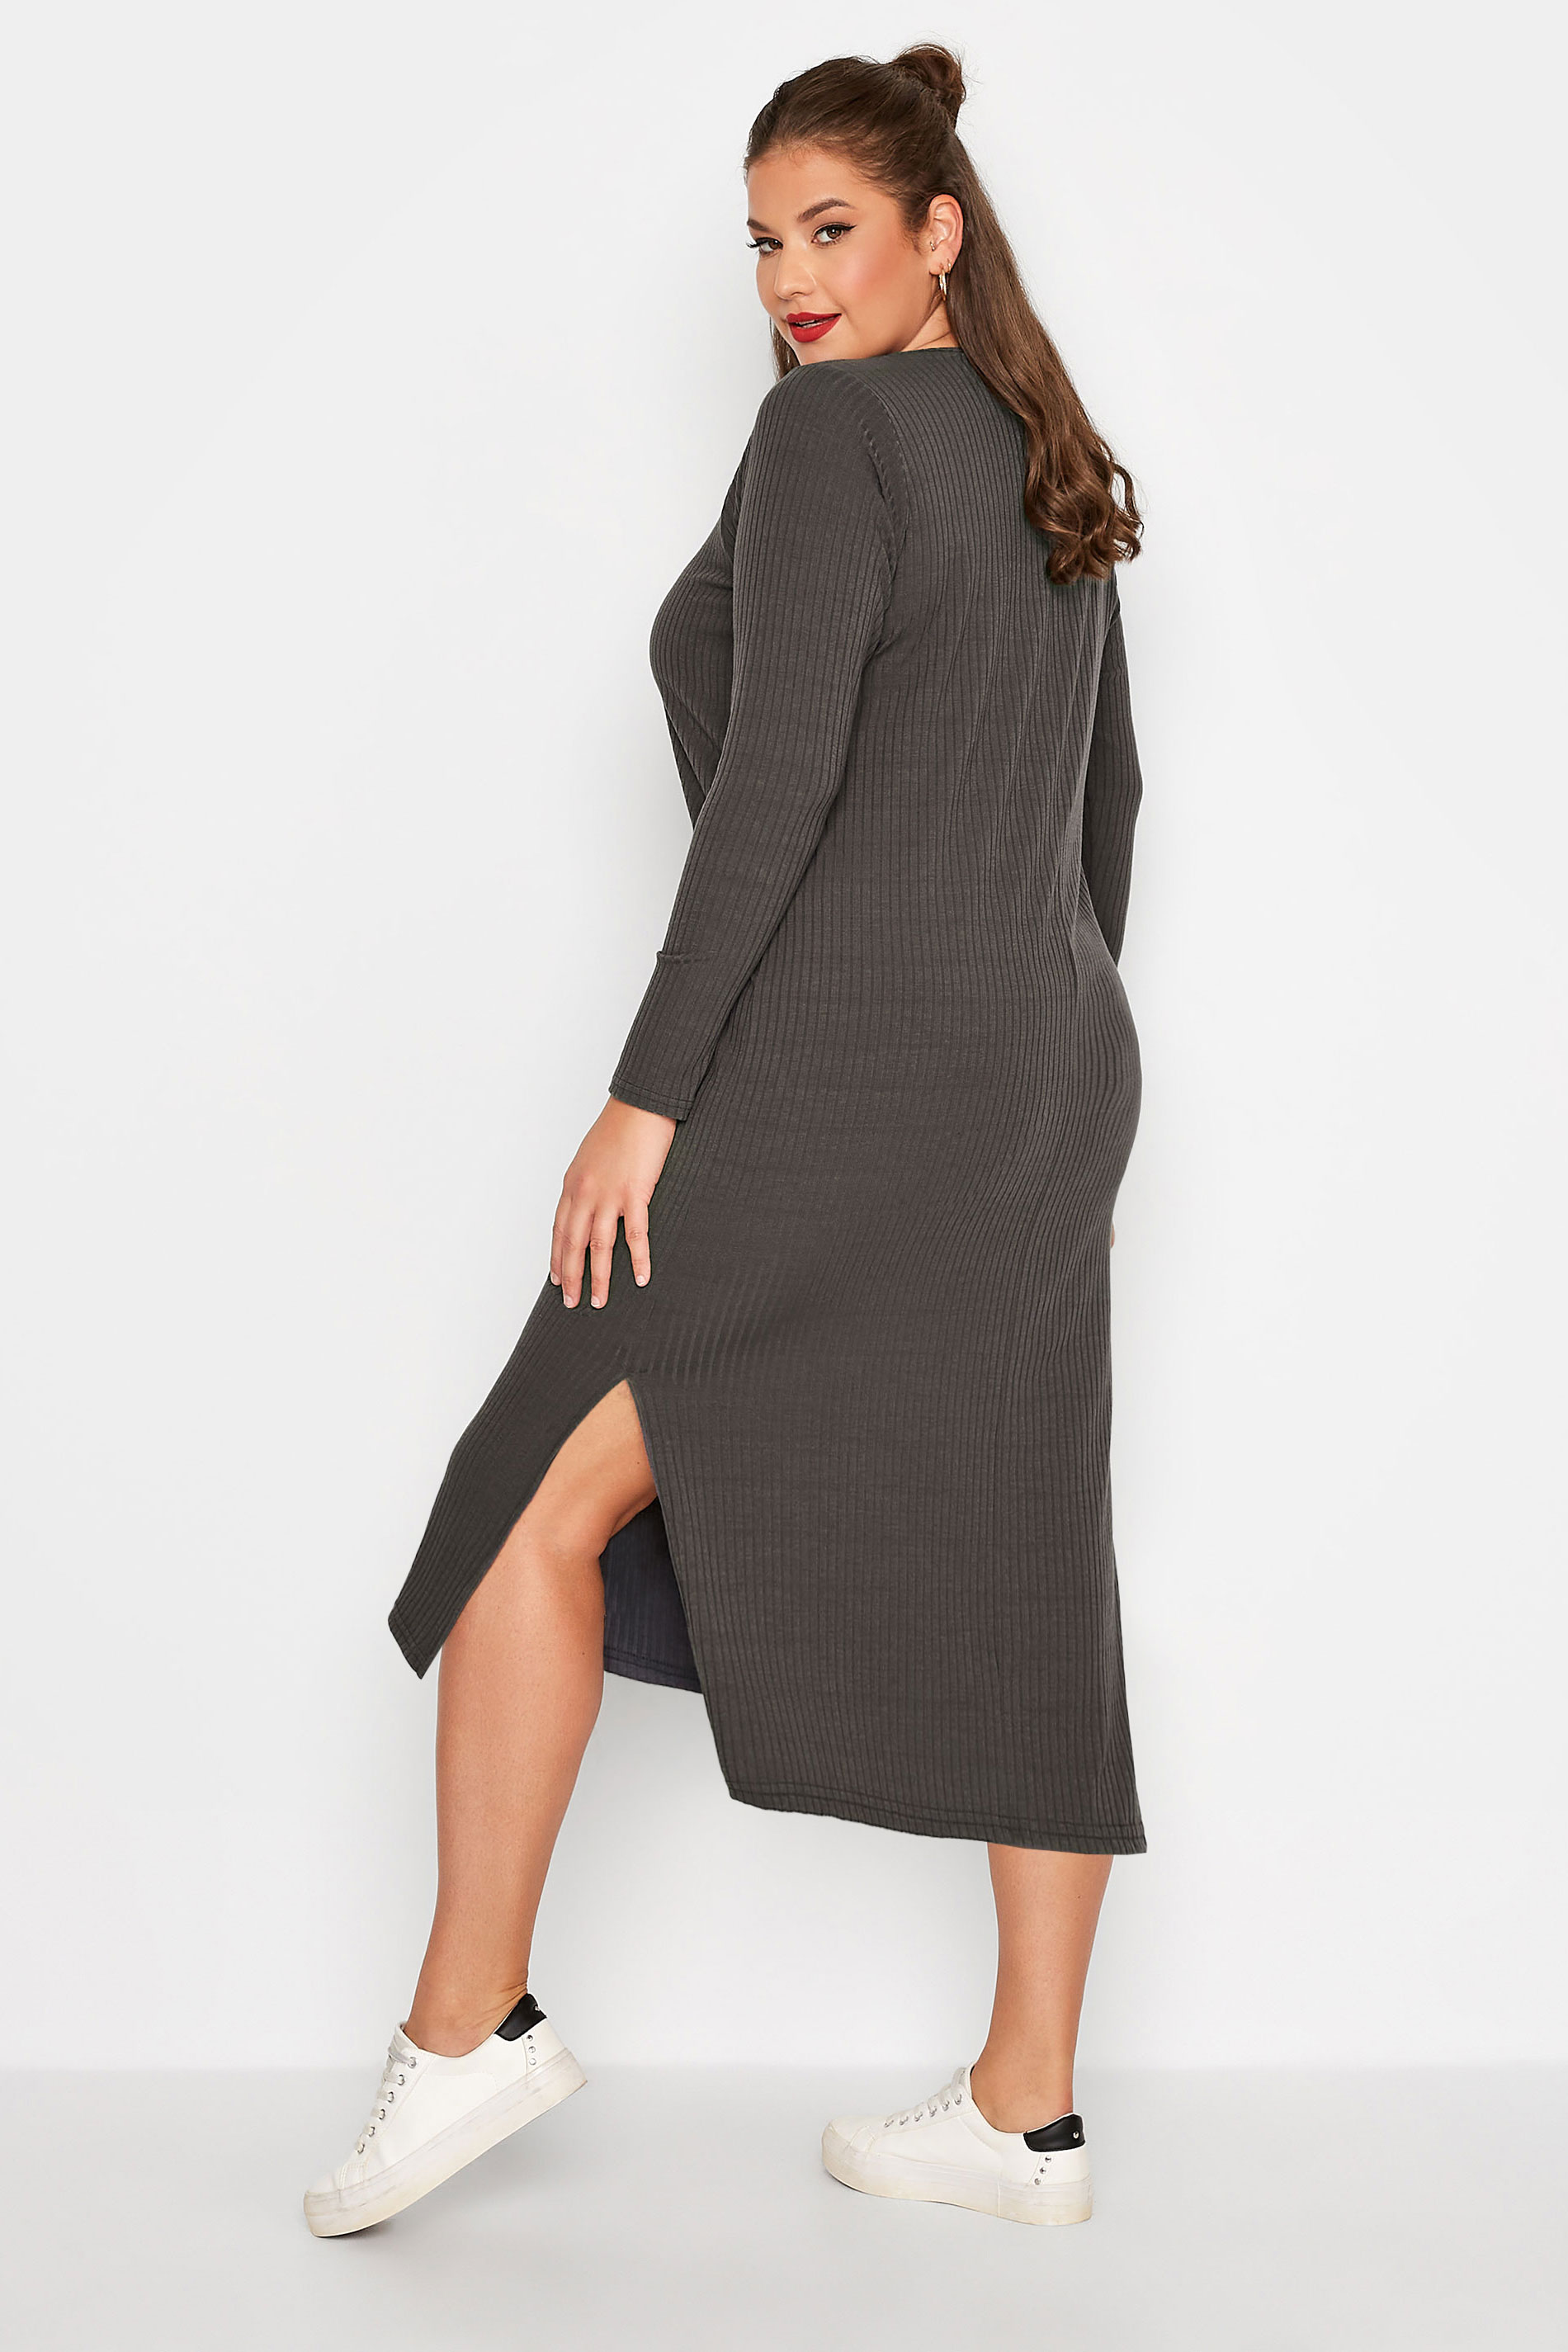 LIMITED COLLECTION Plus Size Charcoal Grey Ribbed Dress | Yours Clothing 3